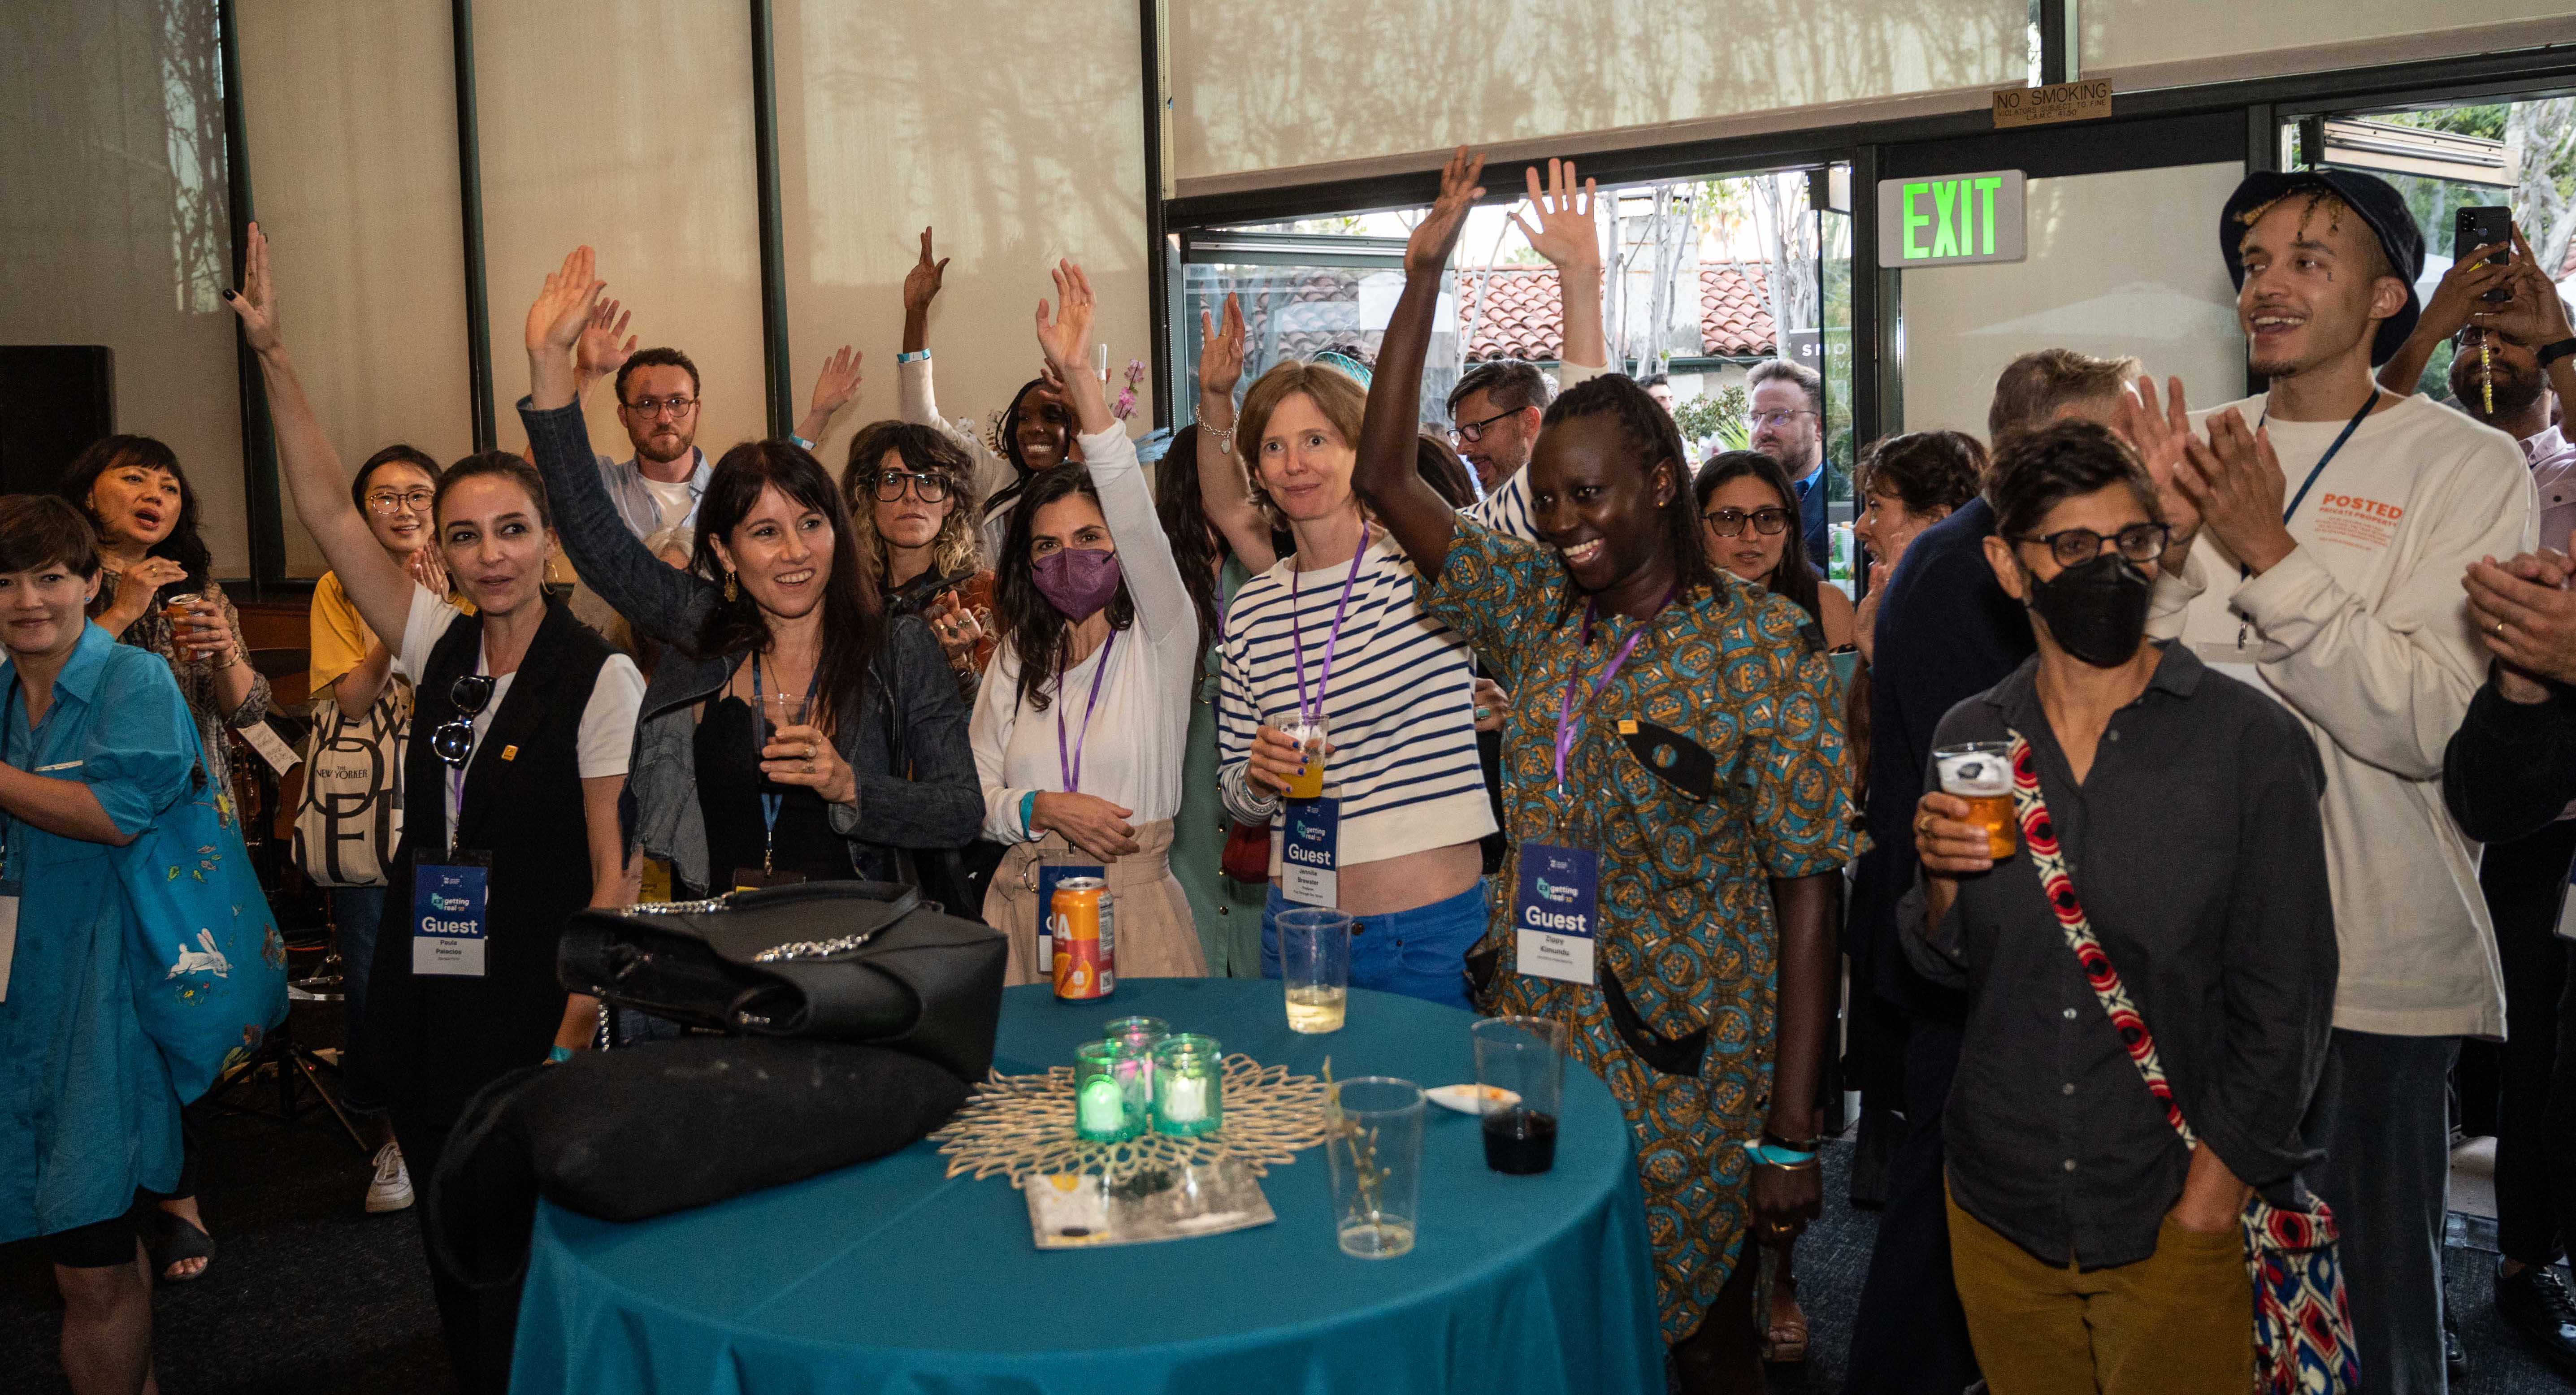 IDA Grantees raising their hands at the IDA Grantee Reception during Getting Real '22 on September 29, 2022 at the Director's Guild of America, Los Angeles. Photo courtesy of Urbanite Media LA.